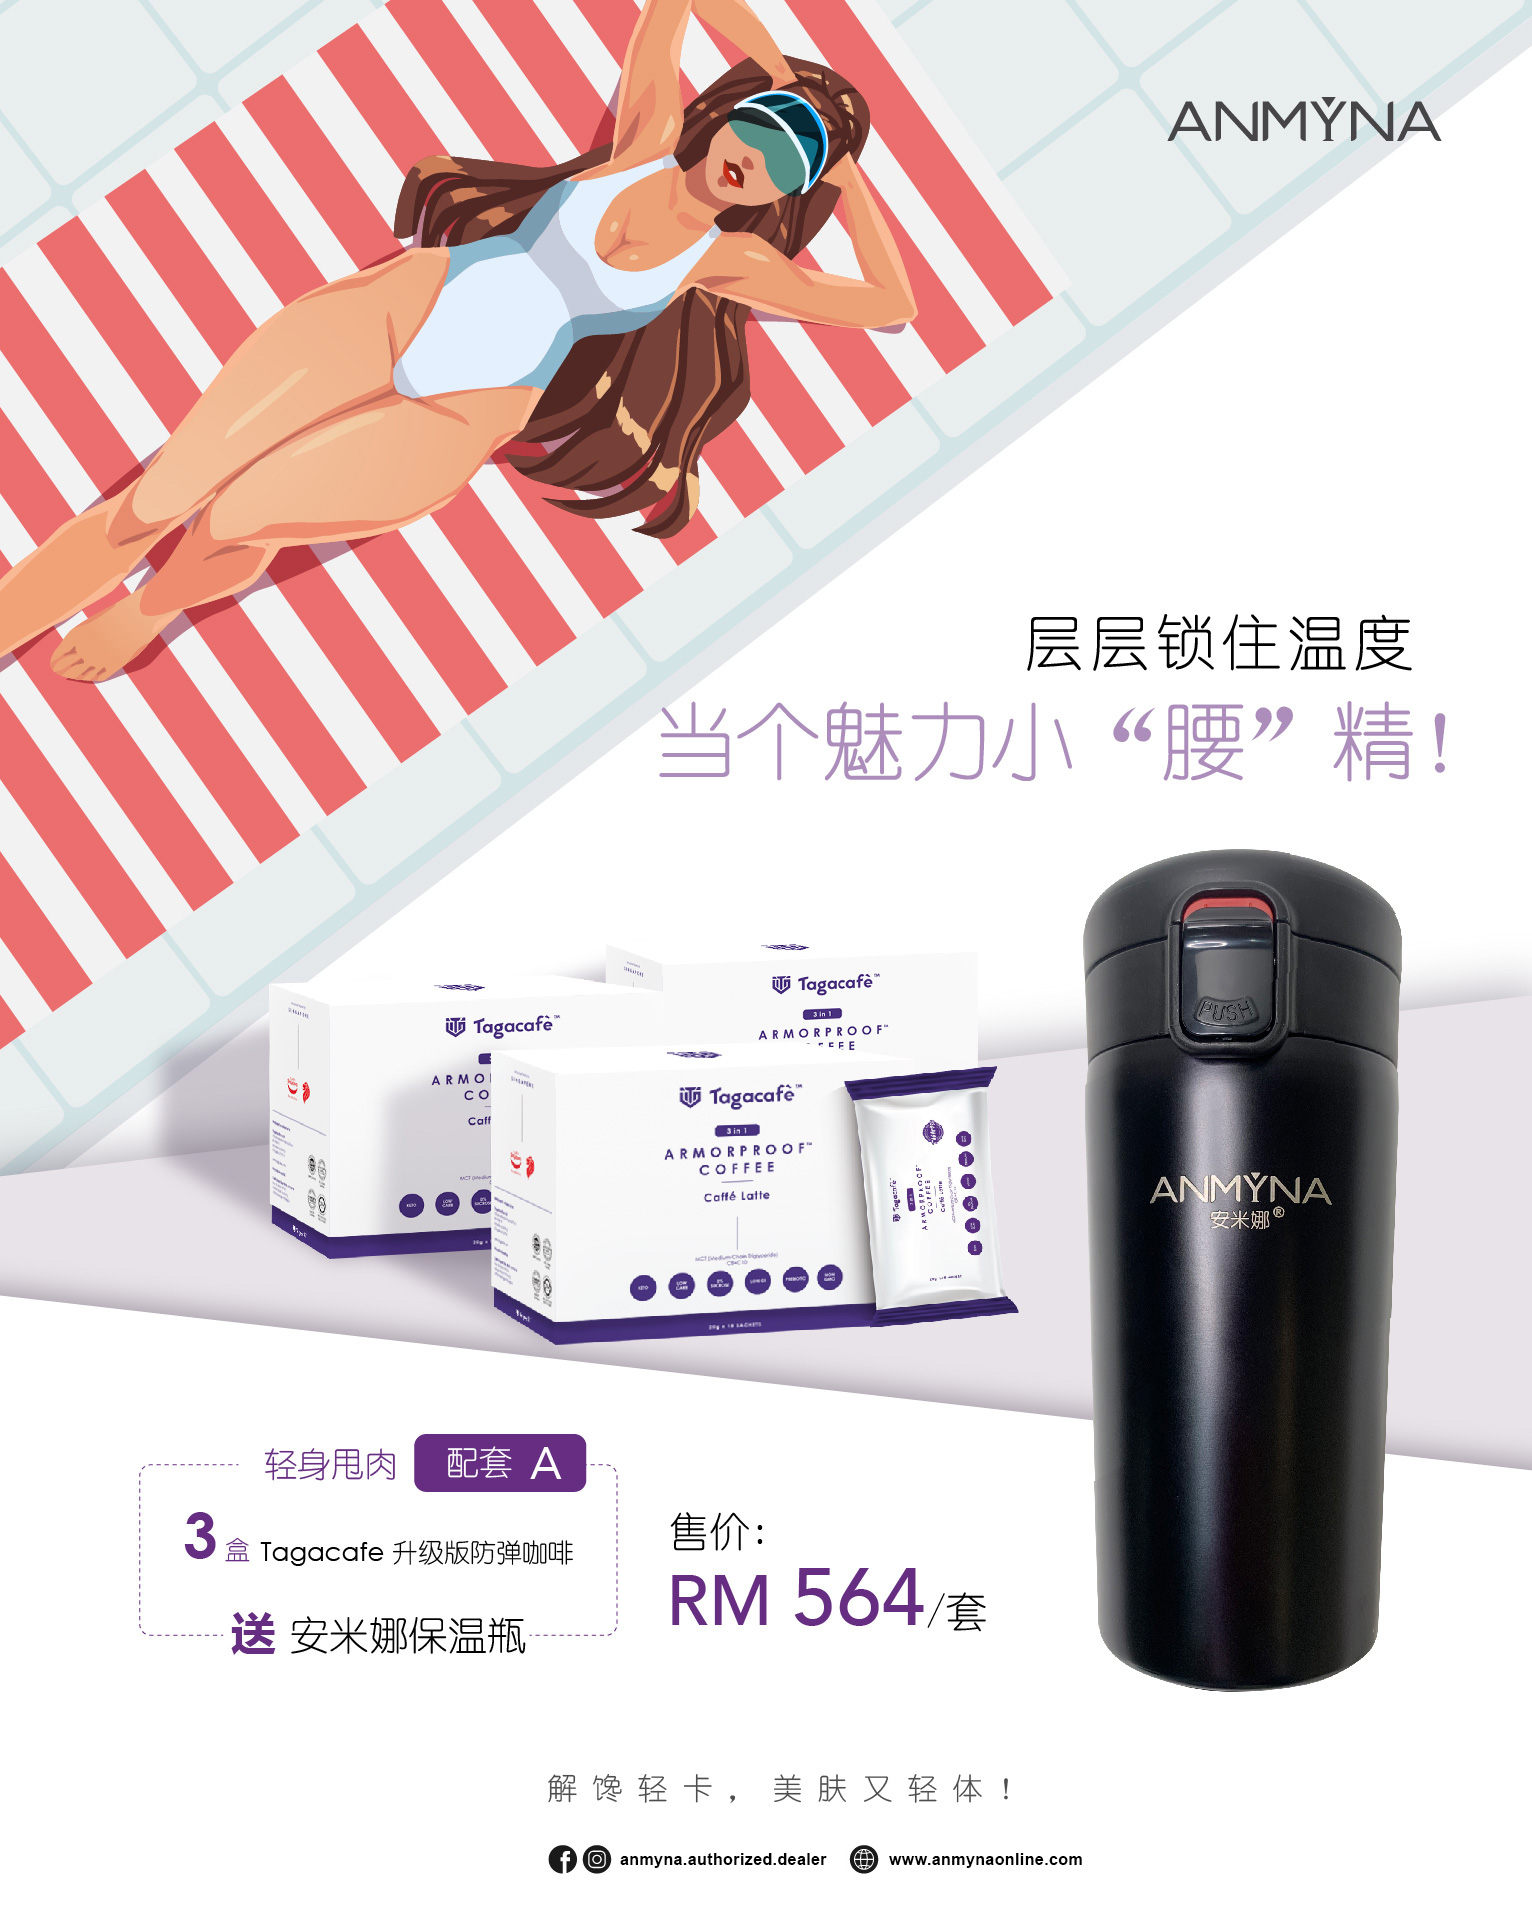 Anmyna, Collagen, Tagacafe, Promotions